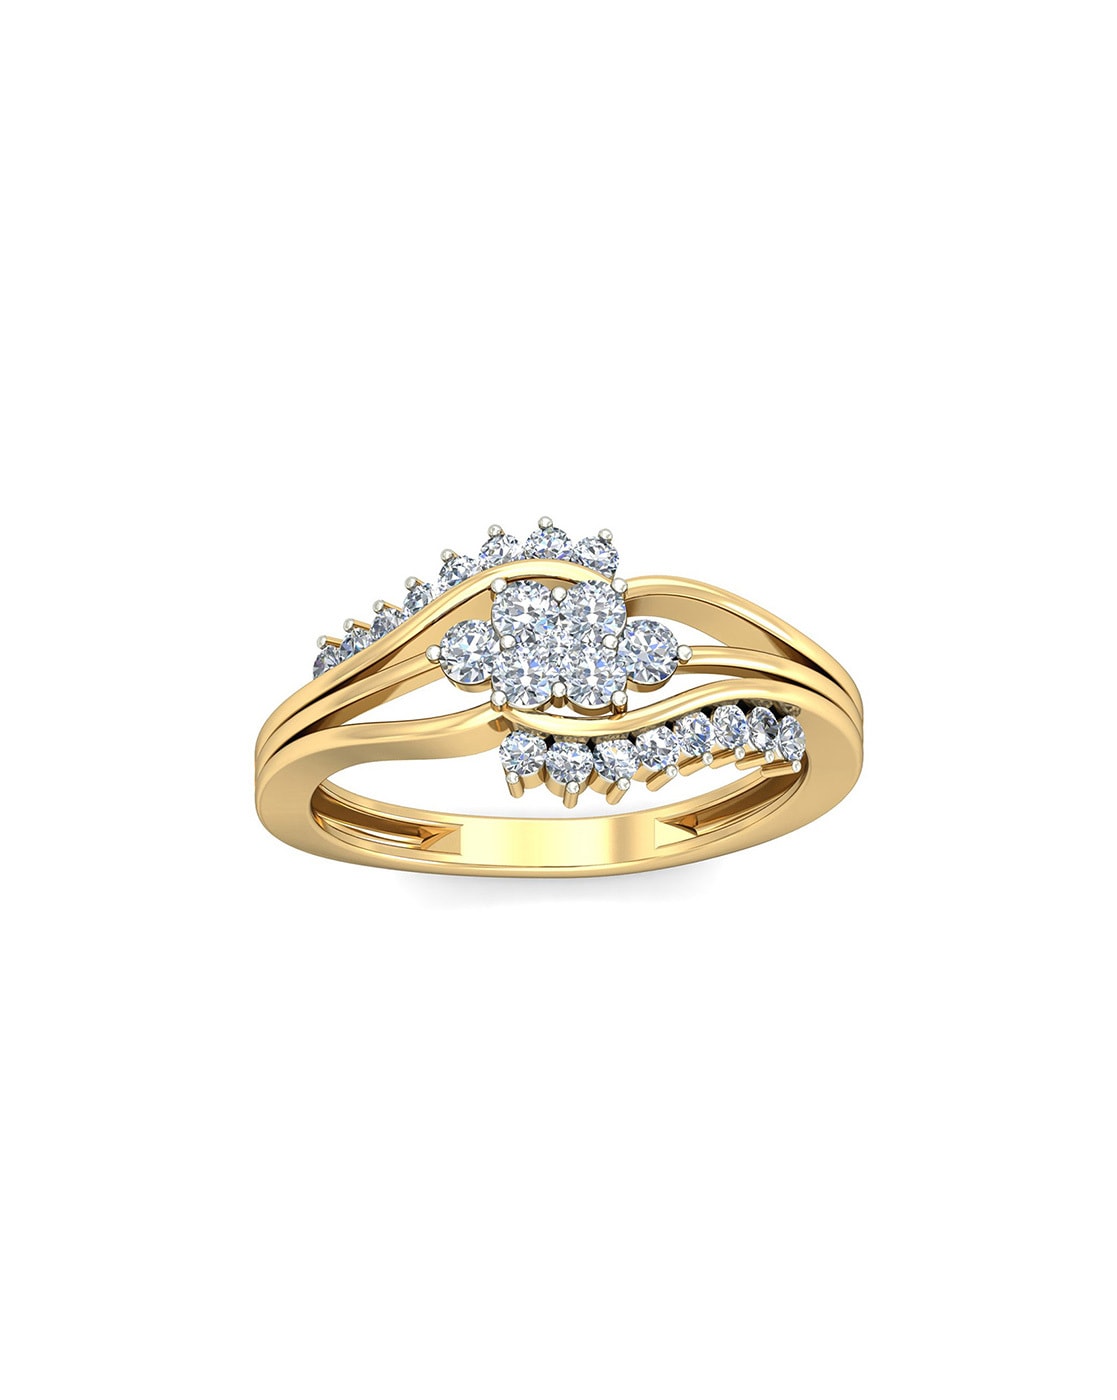 0.25 carat 18K Gold - Evelina Engagement Ring at Best Prices in India |  SarvadaJewels.com